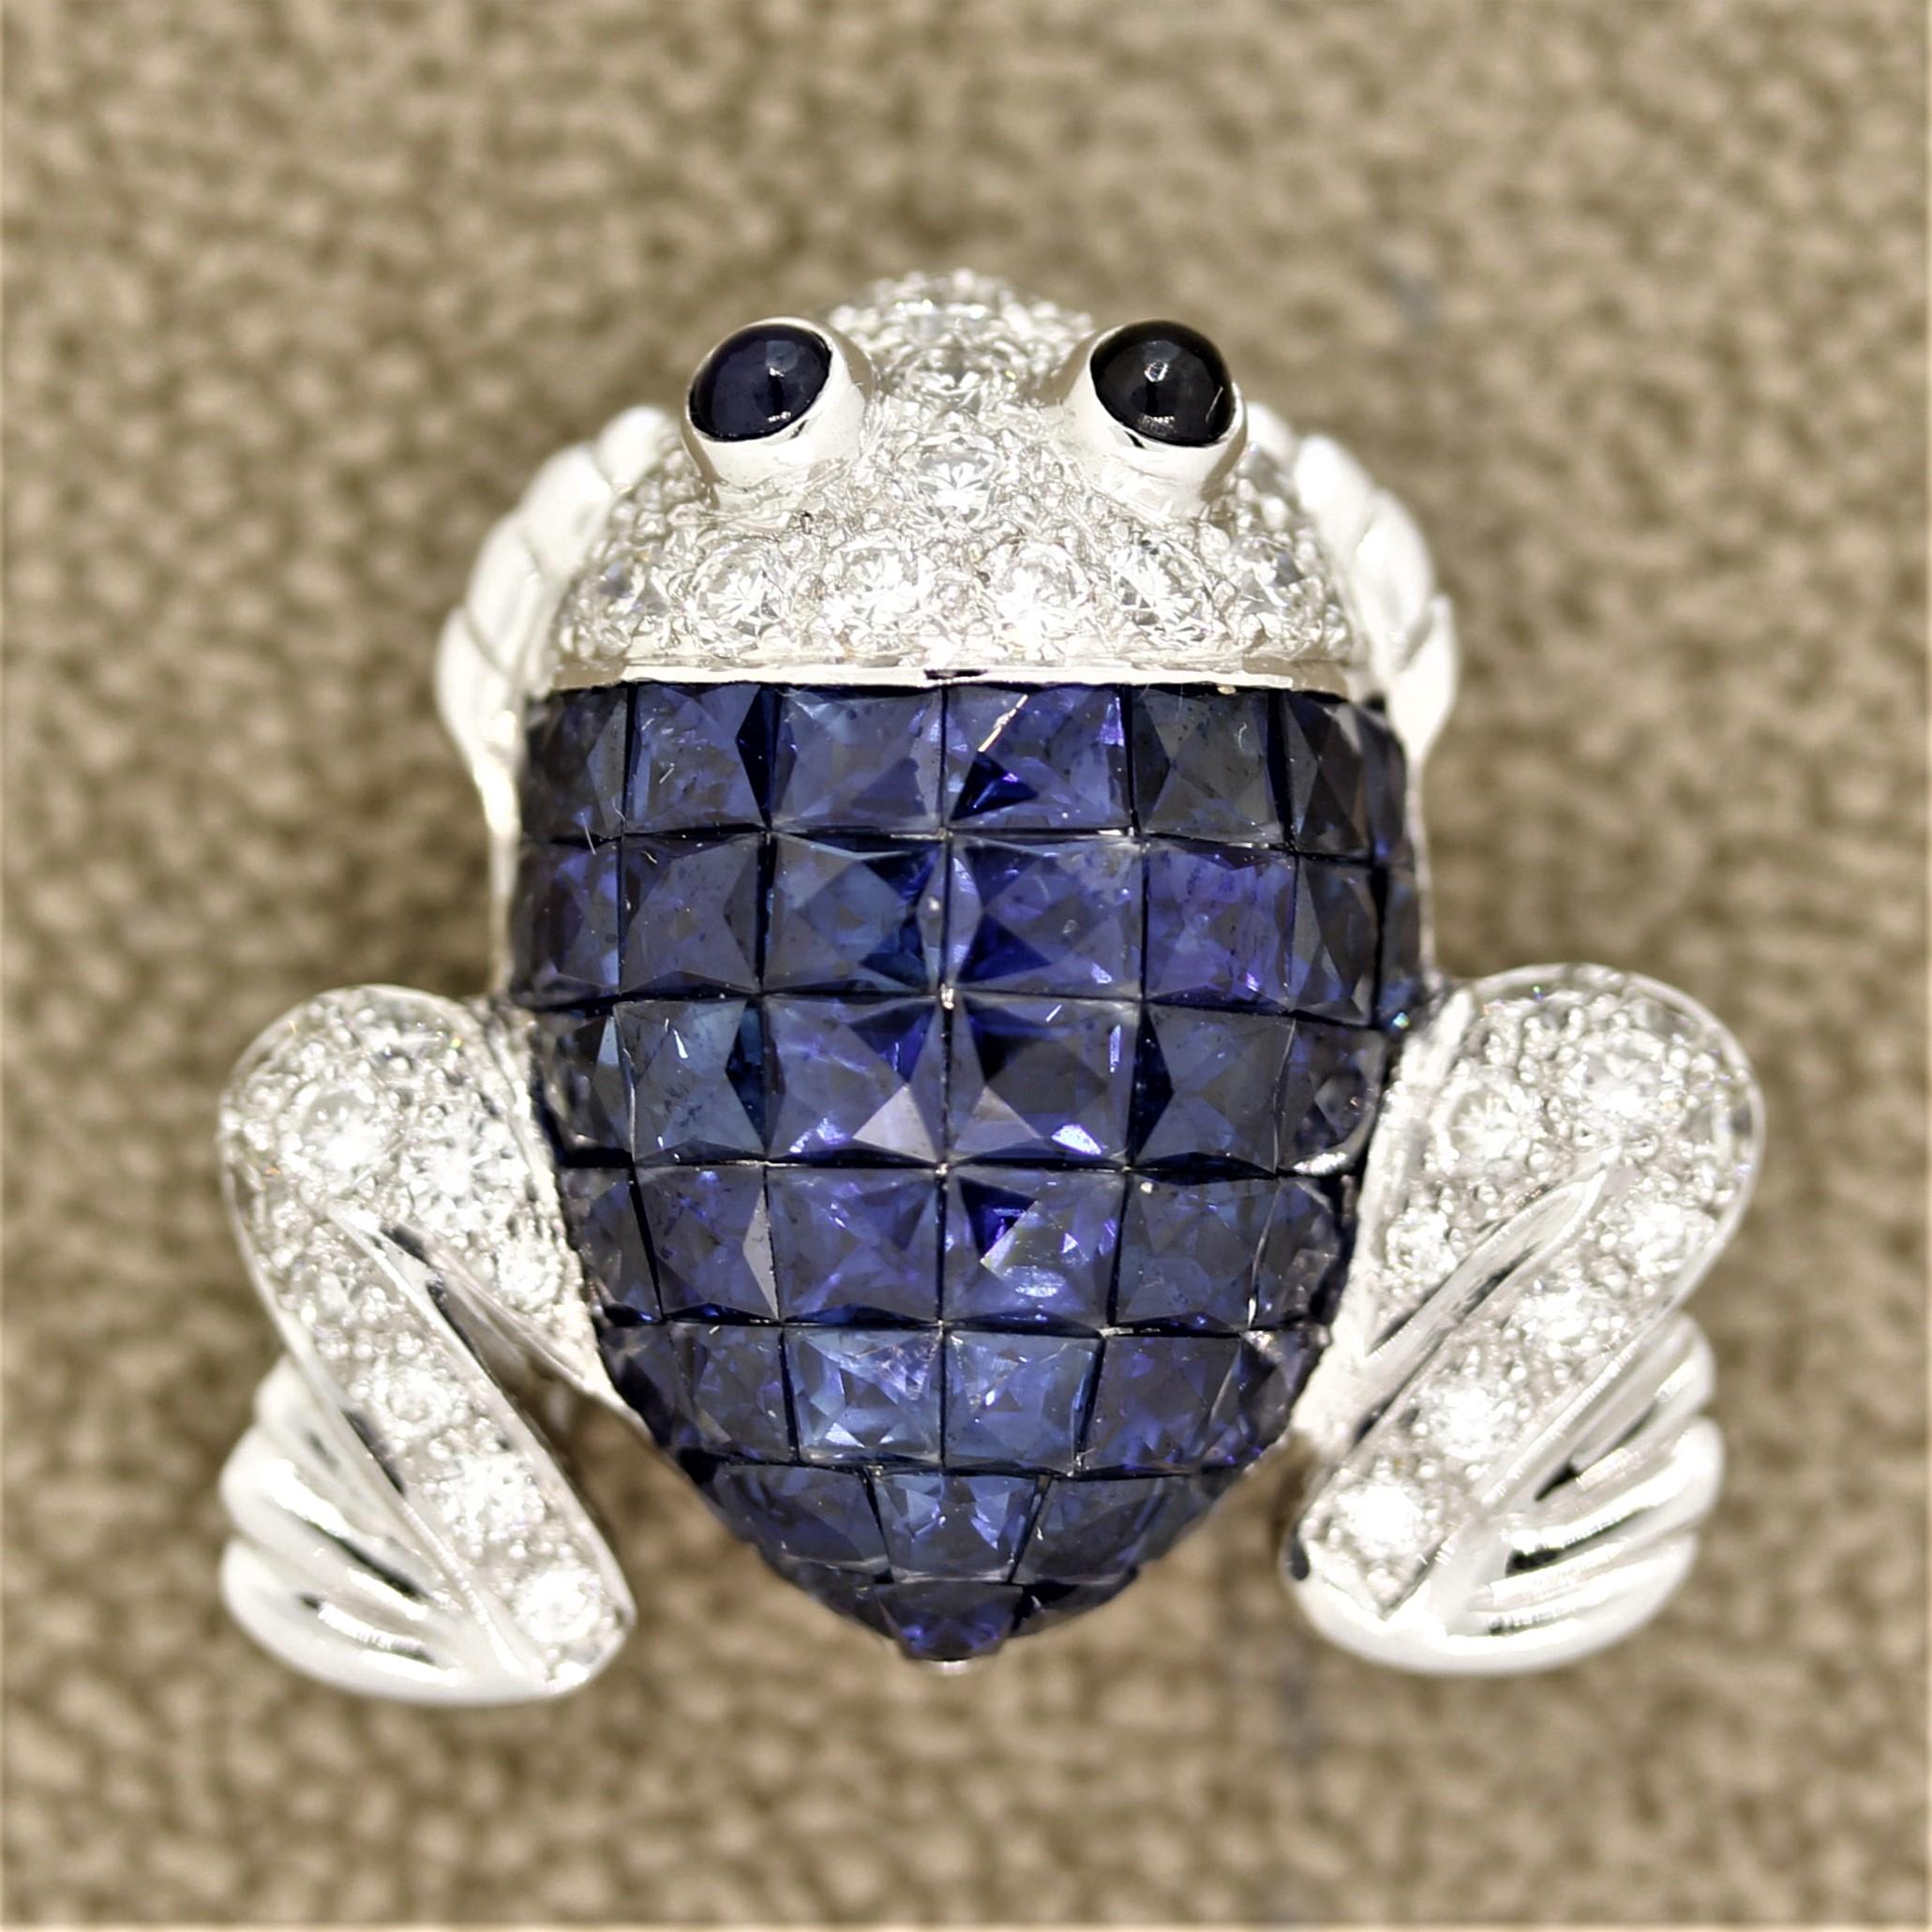 A sweet and lovey gem-set frog! It features 6.80 carats of square cut blue sapphires which are mystery set across its body. The mystery setting allows the stones to be set side by side from one another without prong or other gold fixtures over the